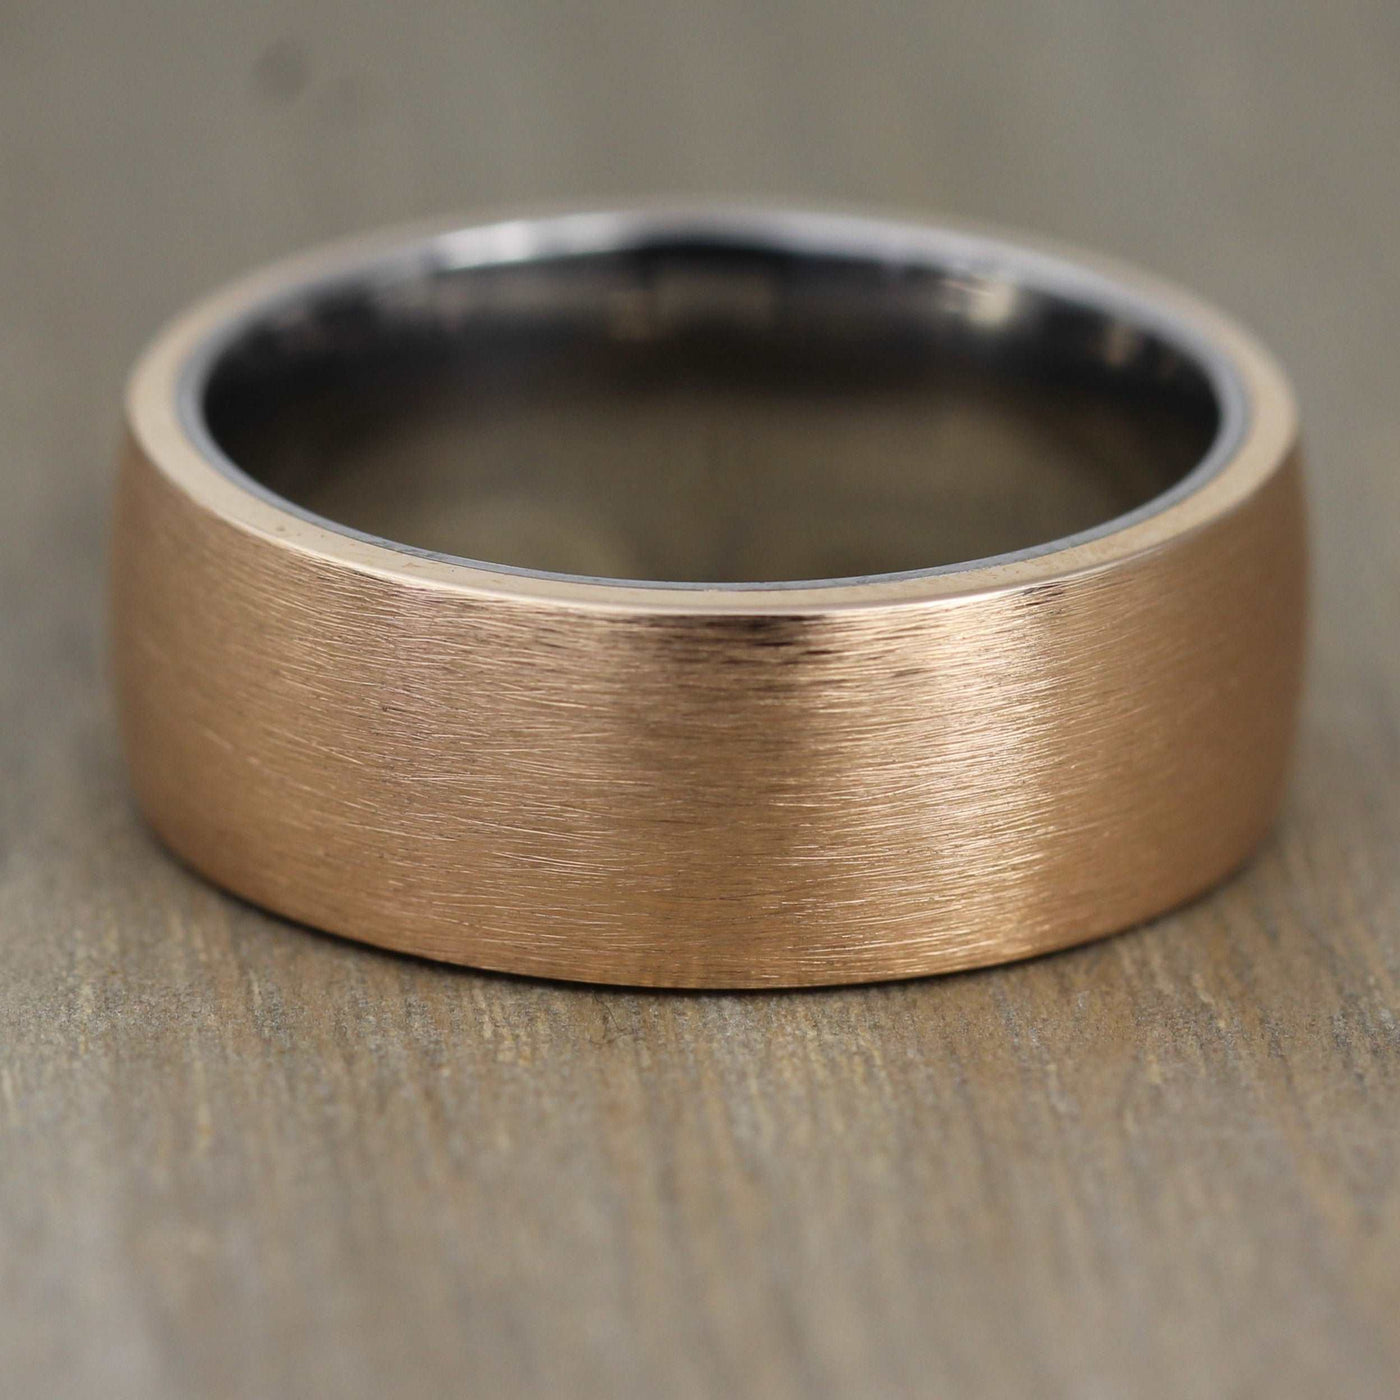  Bronze wedding ring band. mans bronze and titanium ring. bronze wedding ring band uk